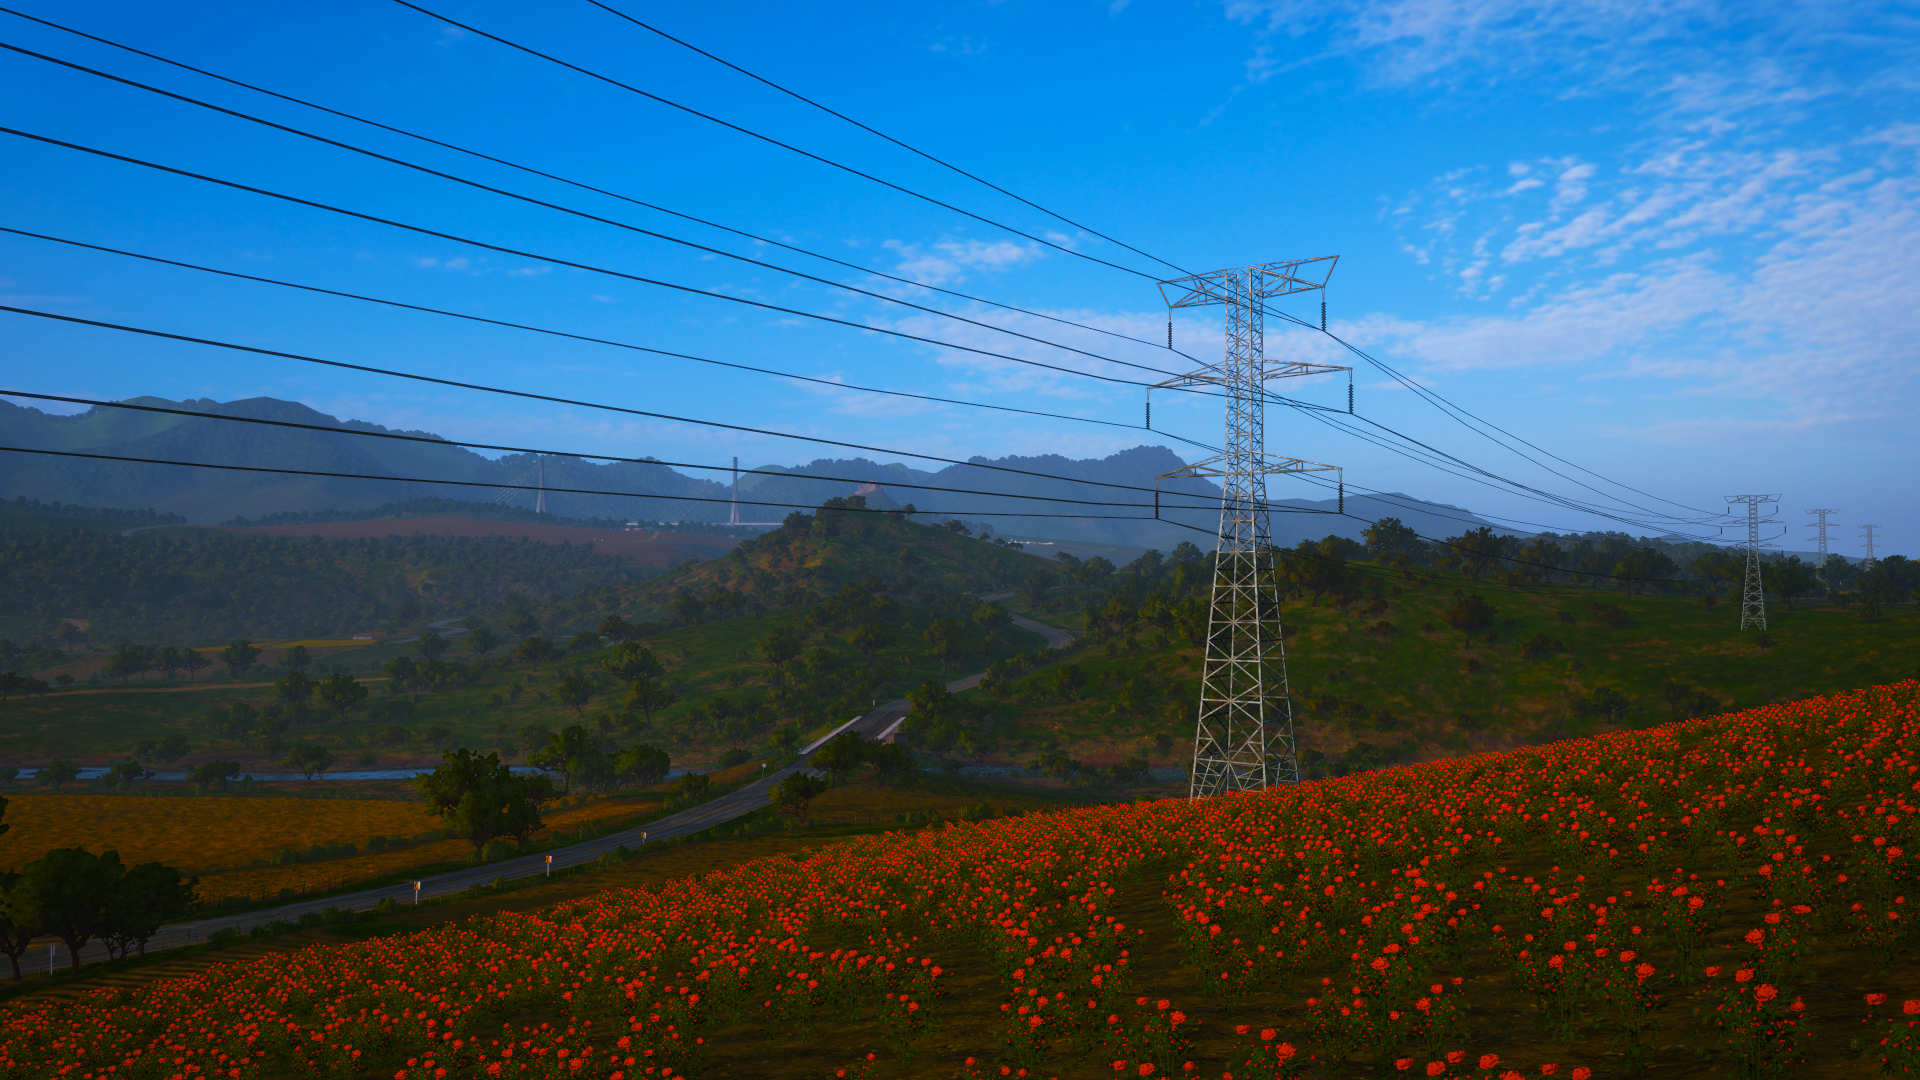 General 1920x1080 sky trees flowers blue red green Xbox Game Studios hills Forza Horizon 5 landscape utility pole video games video game art screen shot PlaygroundGames road Turn 10 Studios Forza clouds power lines CGI